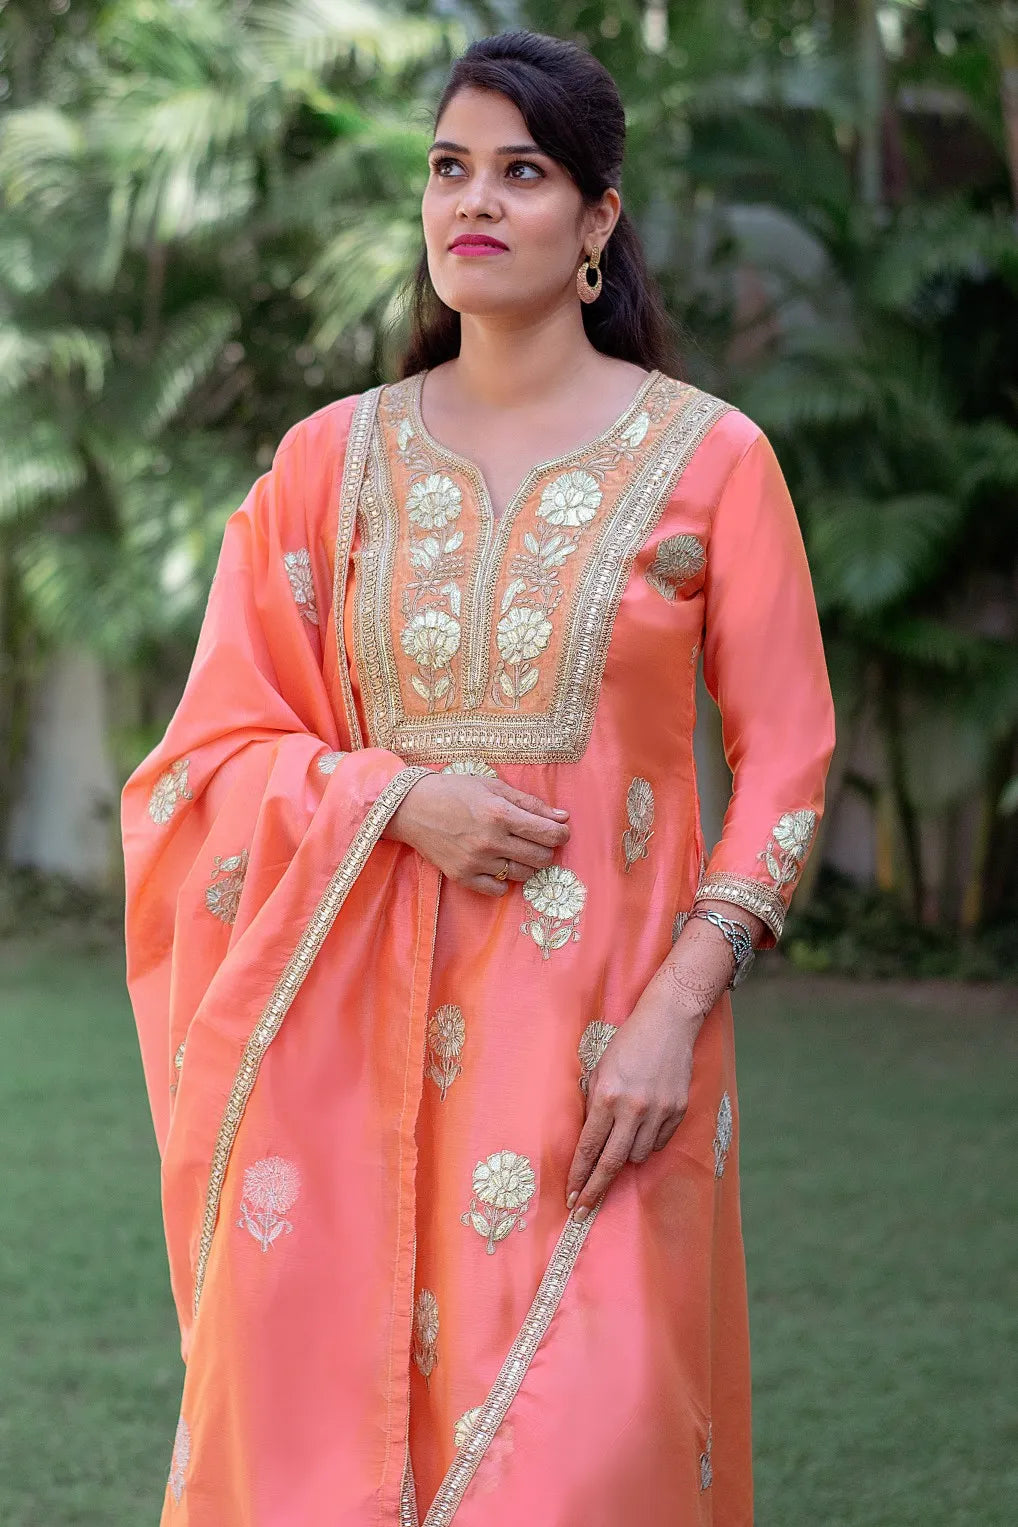 An Indian lady donning a Peach Chanderi Kurta with intricate Gota Work, paired with a matching Dupatta and a Golden Churidar.